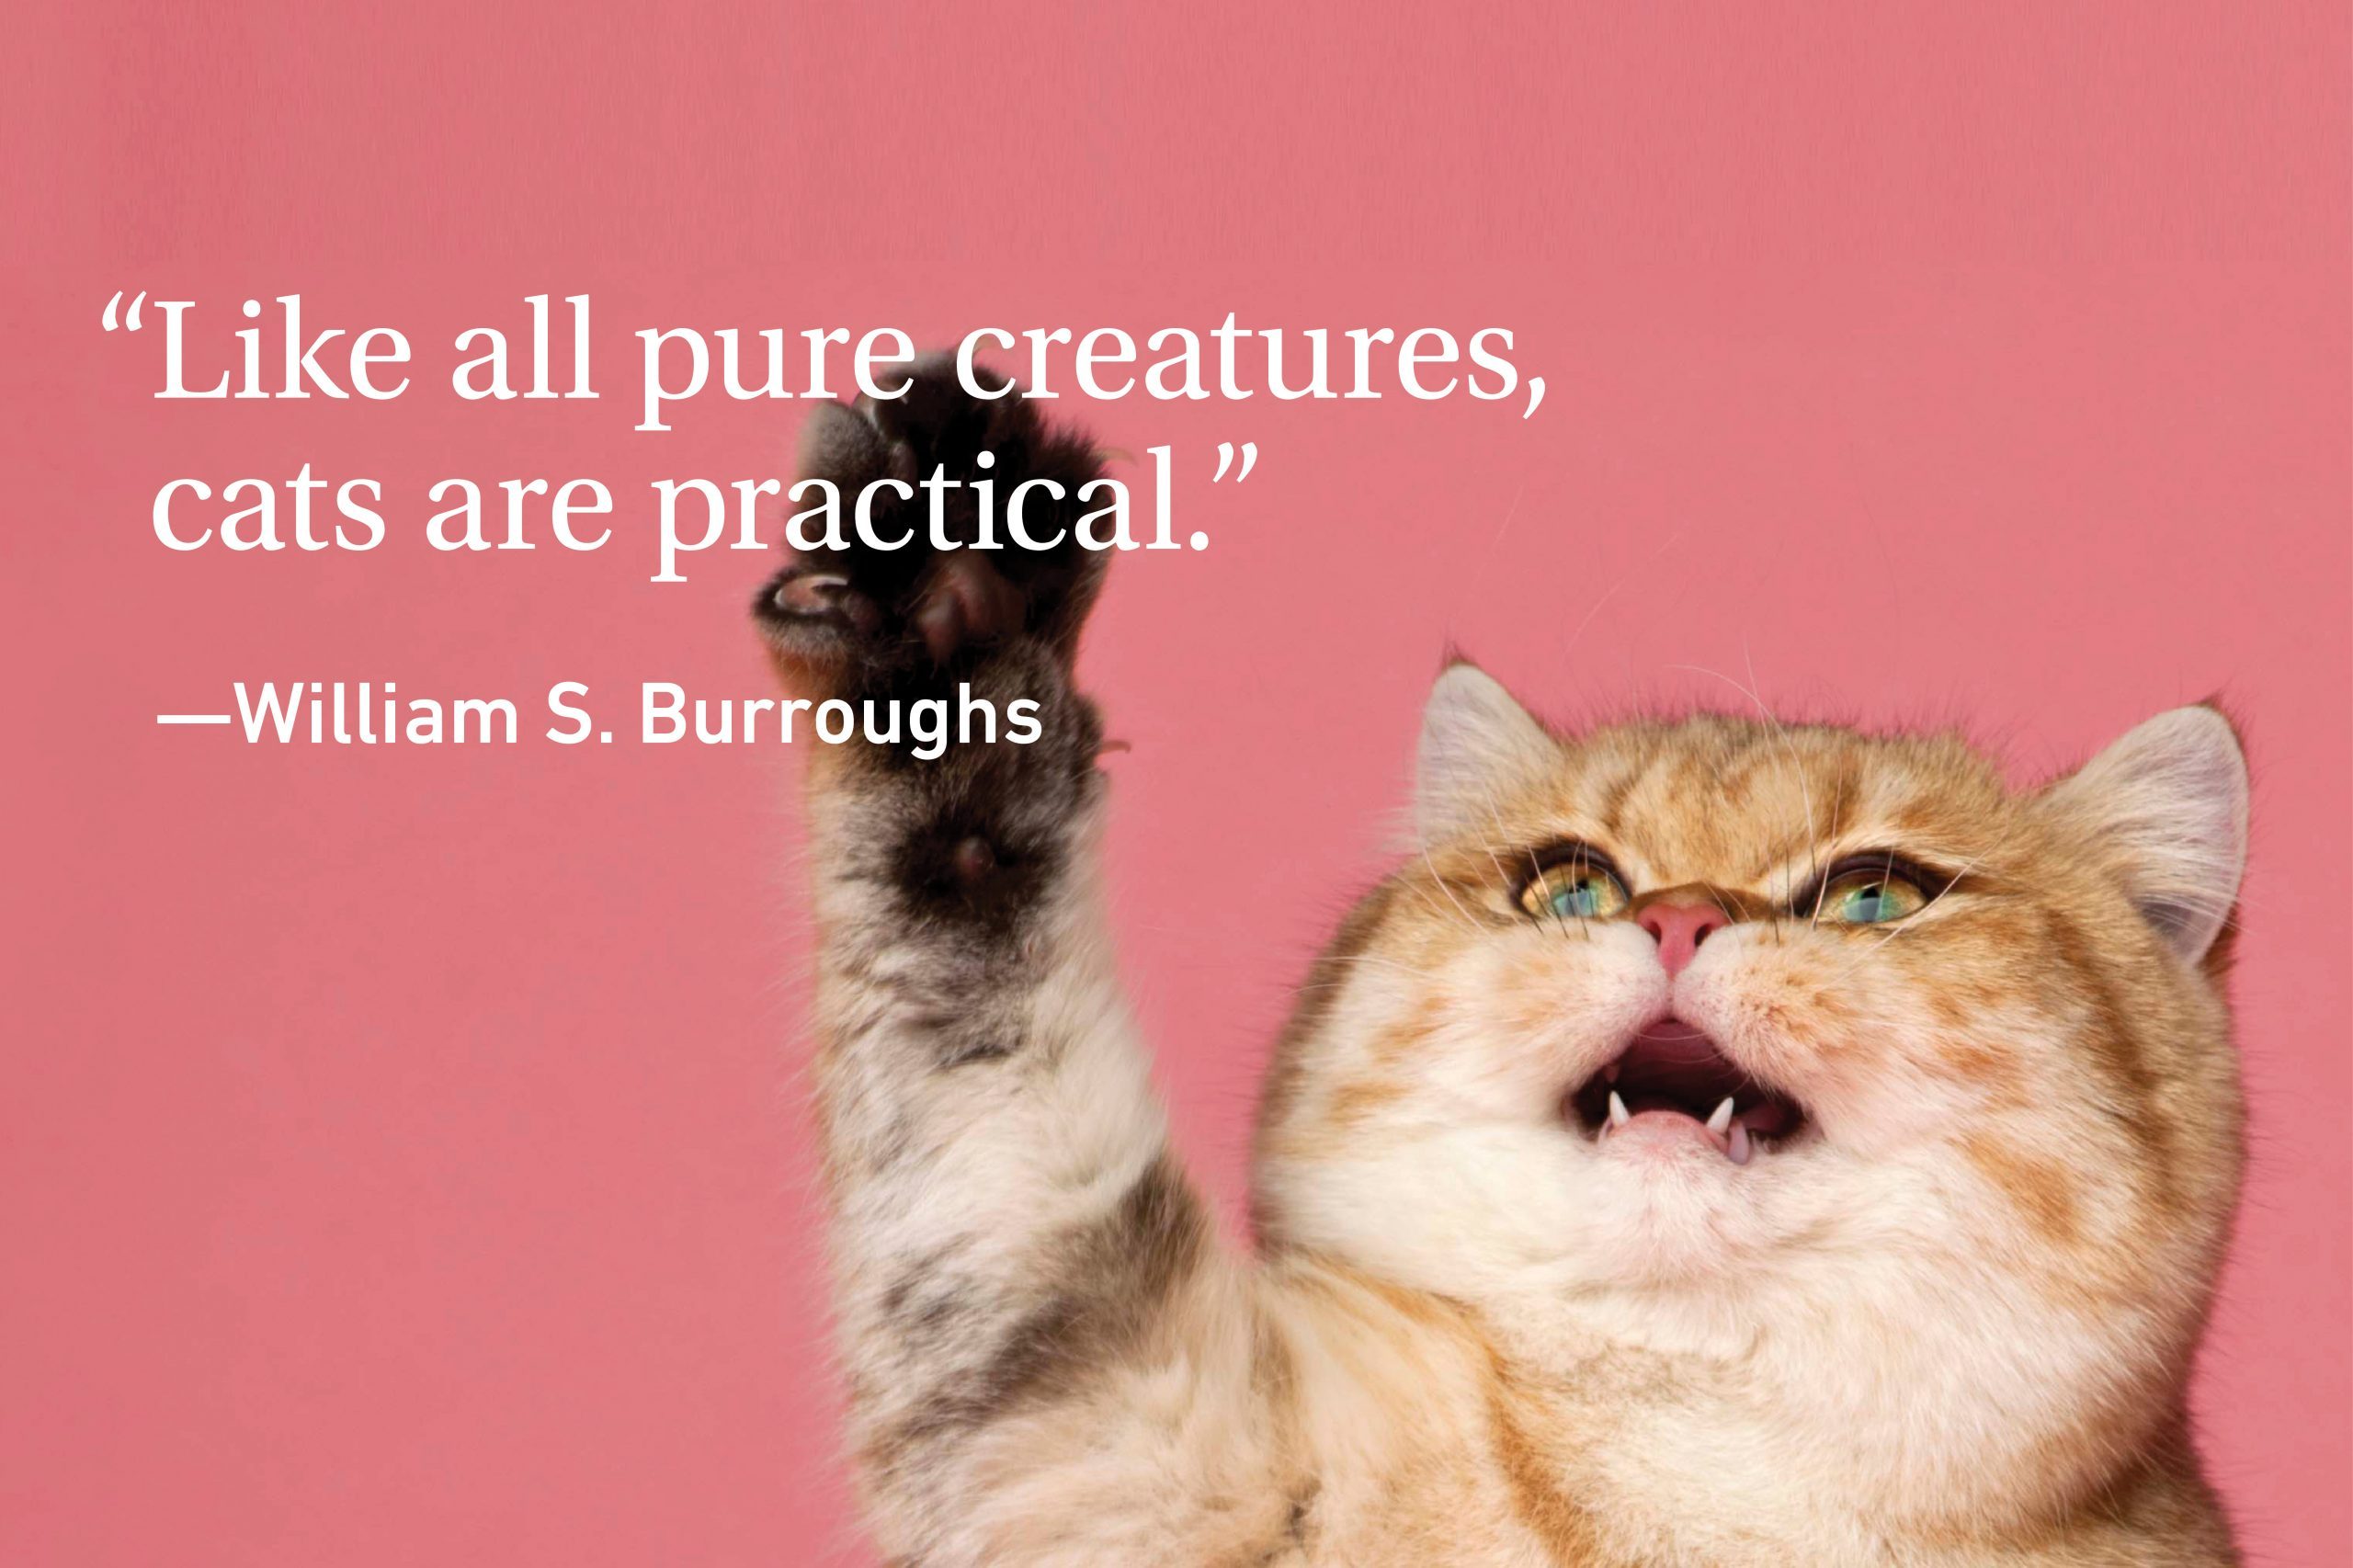 Cat Quote on a pink background with a growling cat